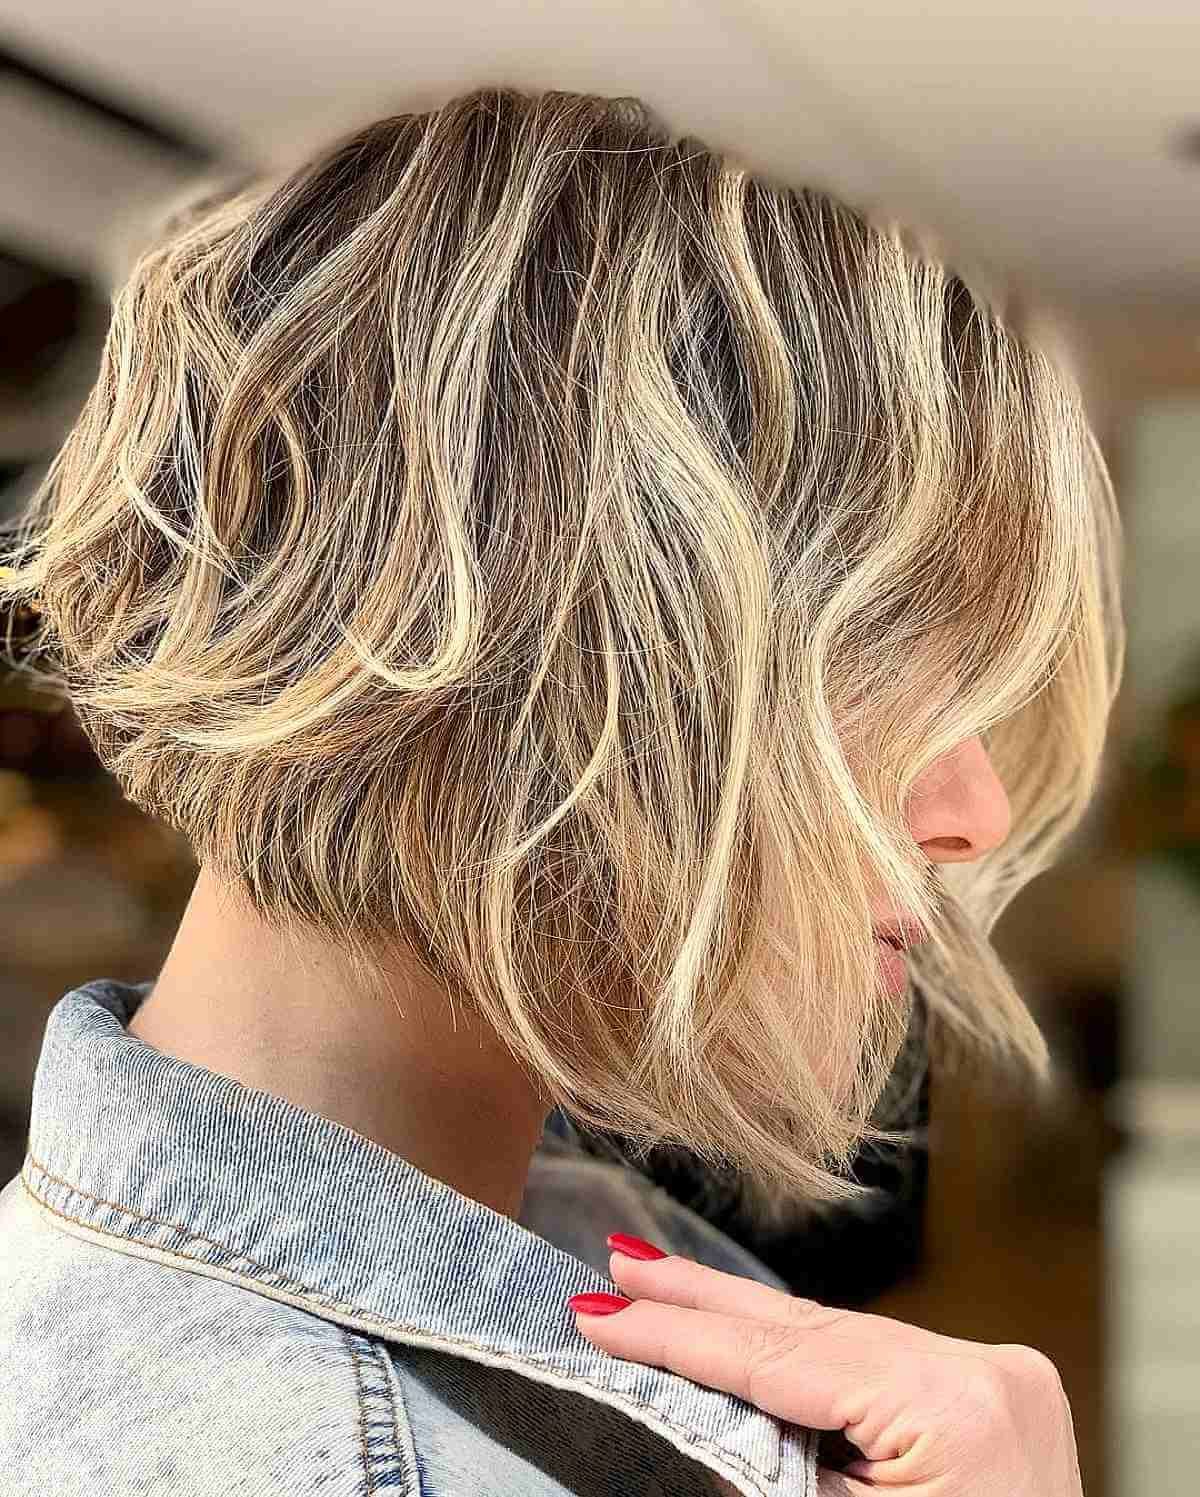 60+ Cutest Short Bob Haircuts You Probably Haven't Seen Yet Intended For Super Volume Short Bob Hairstyles (View 12 of 25)